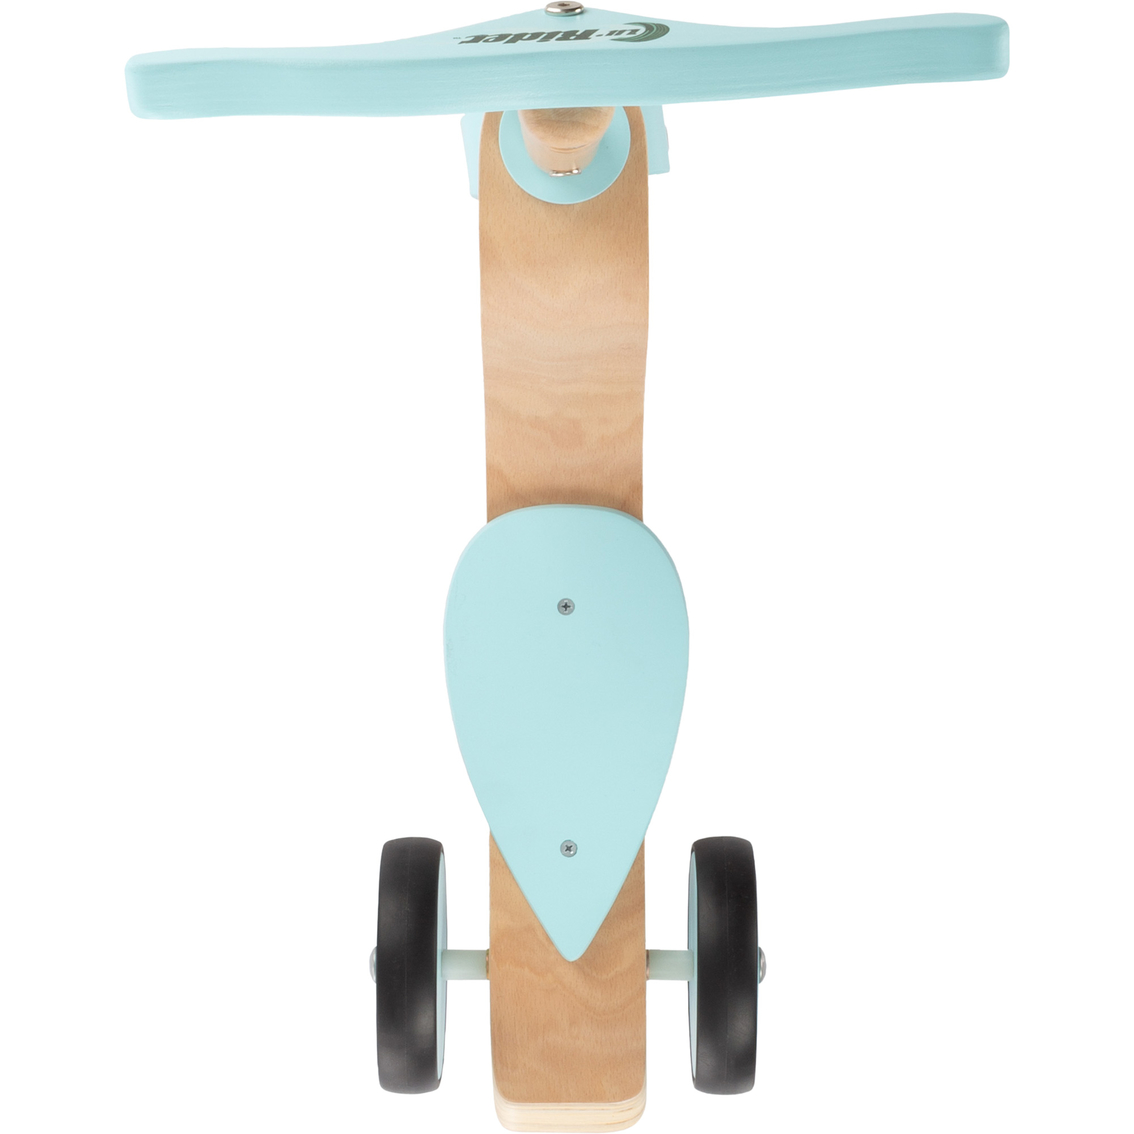 Lil' Rider Wooden Kick Scooter - Image 2 of 6